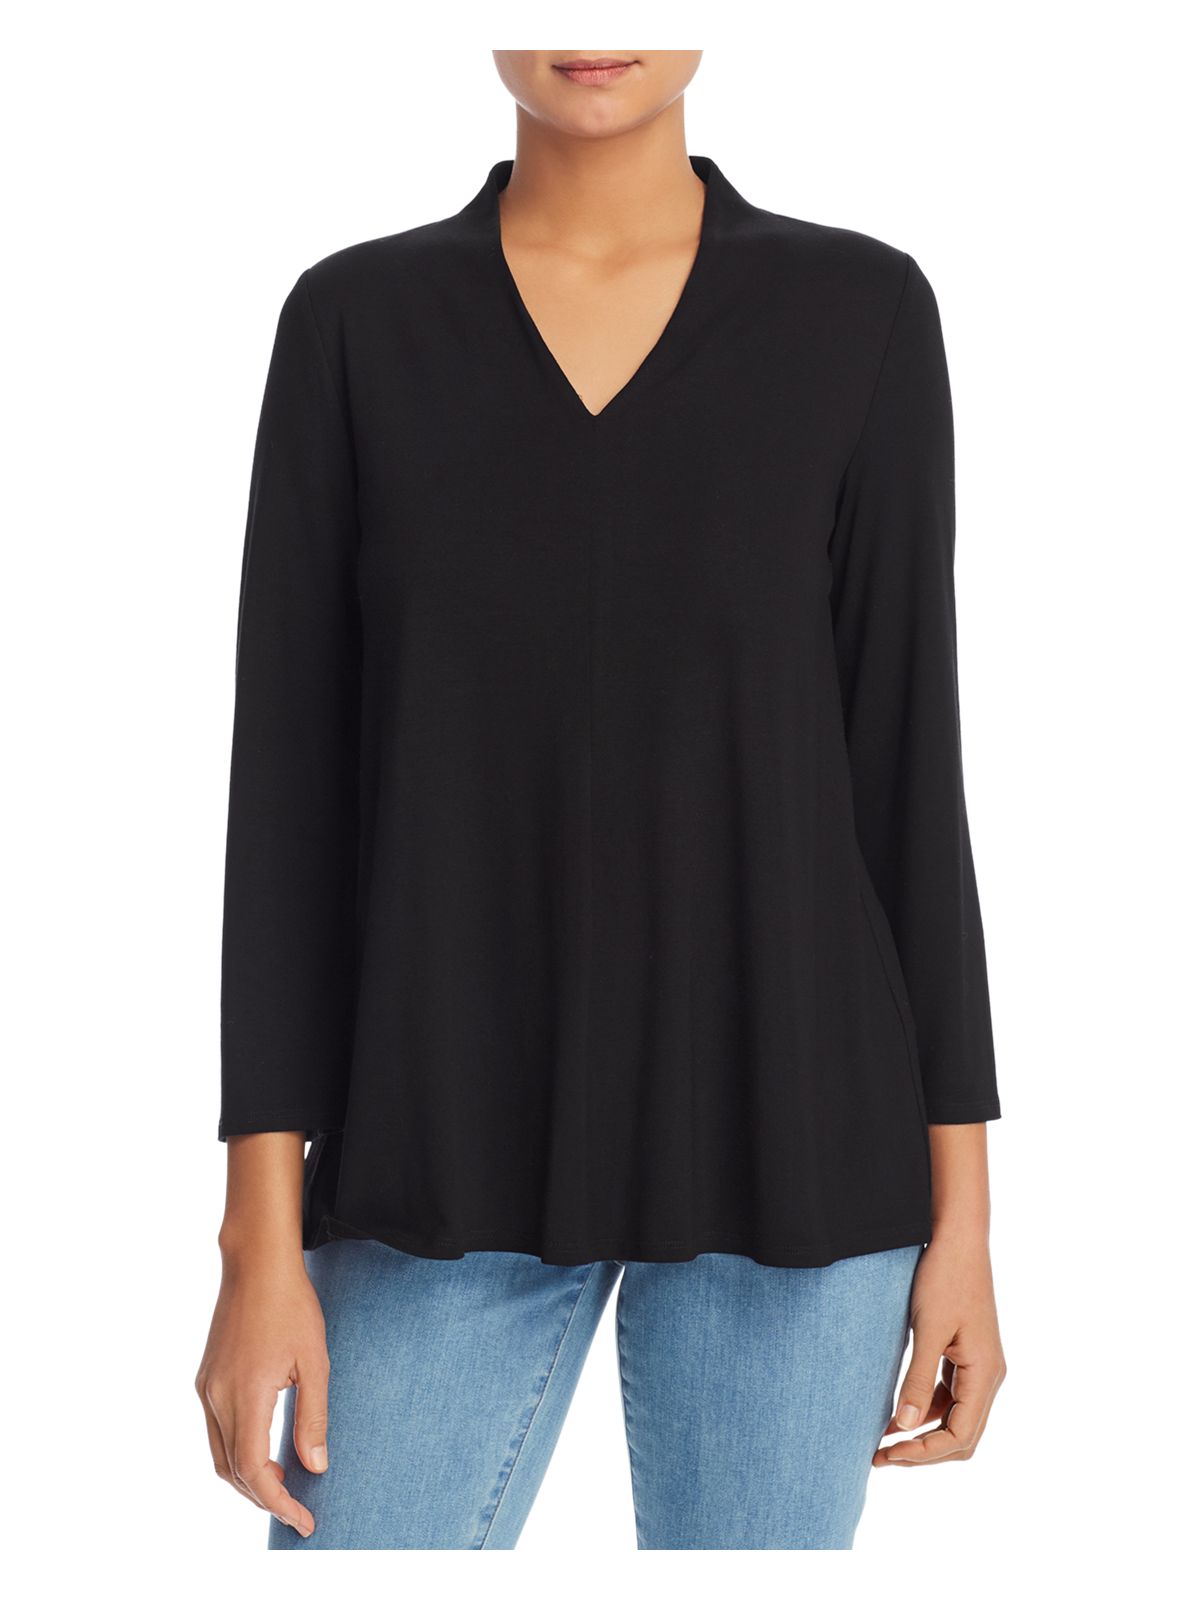 EIGHT EIGHT EIGHT Womens Black Long Sleeve V Neck Top Size: XS